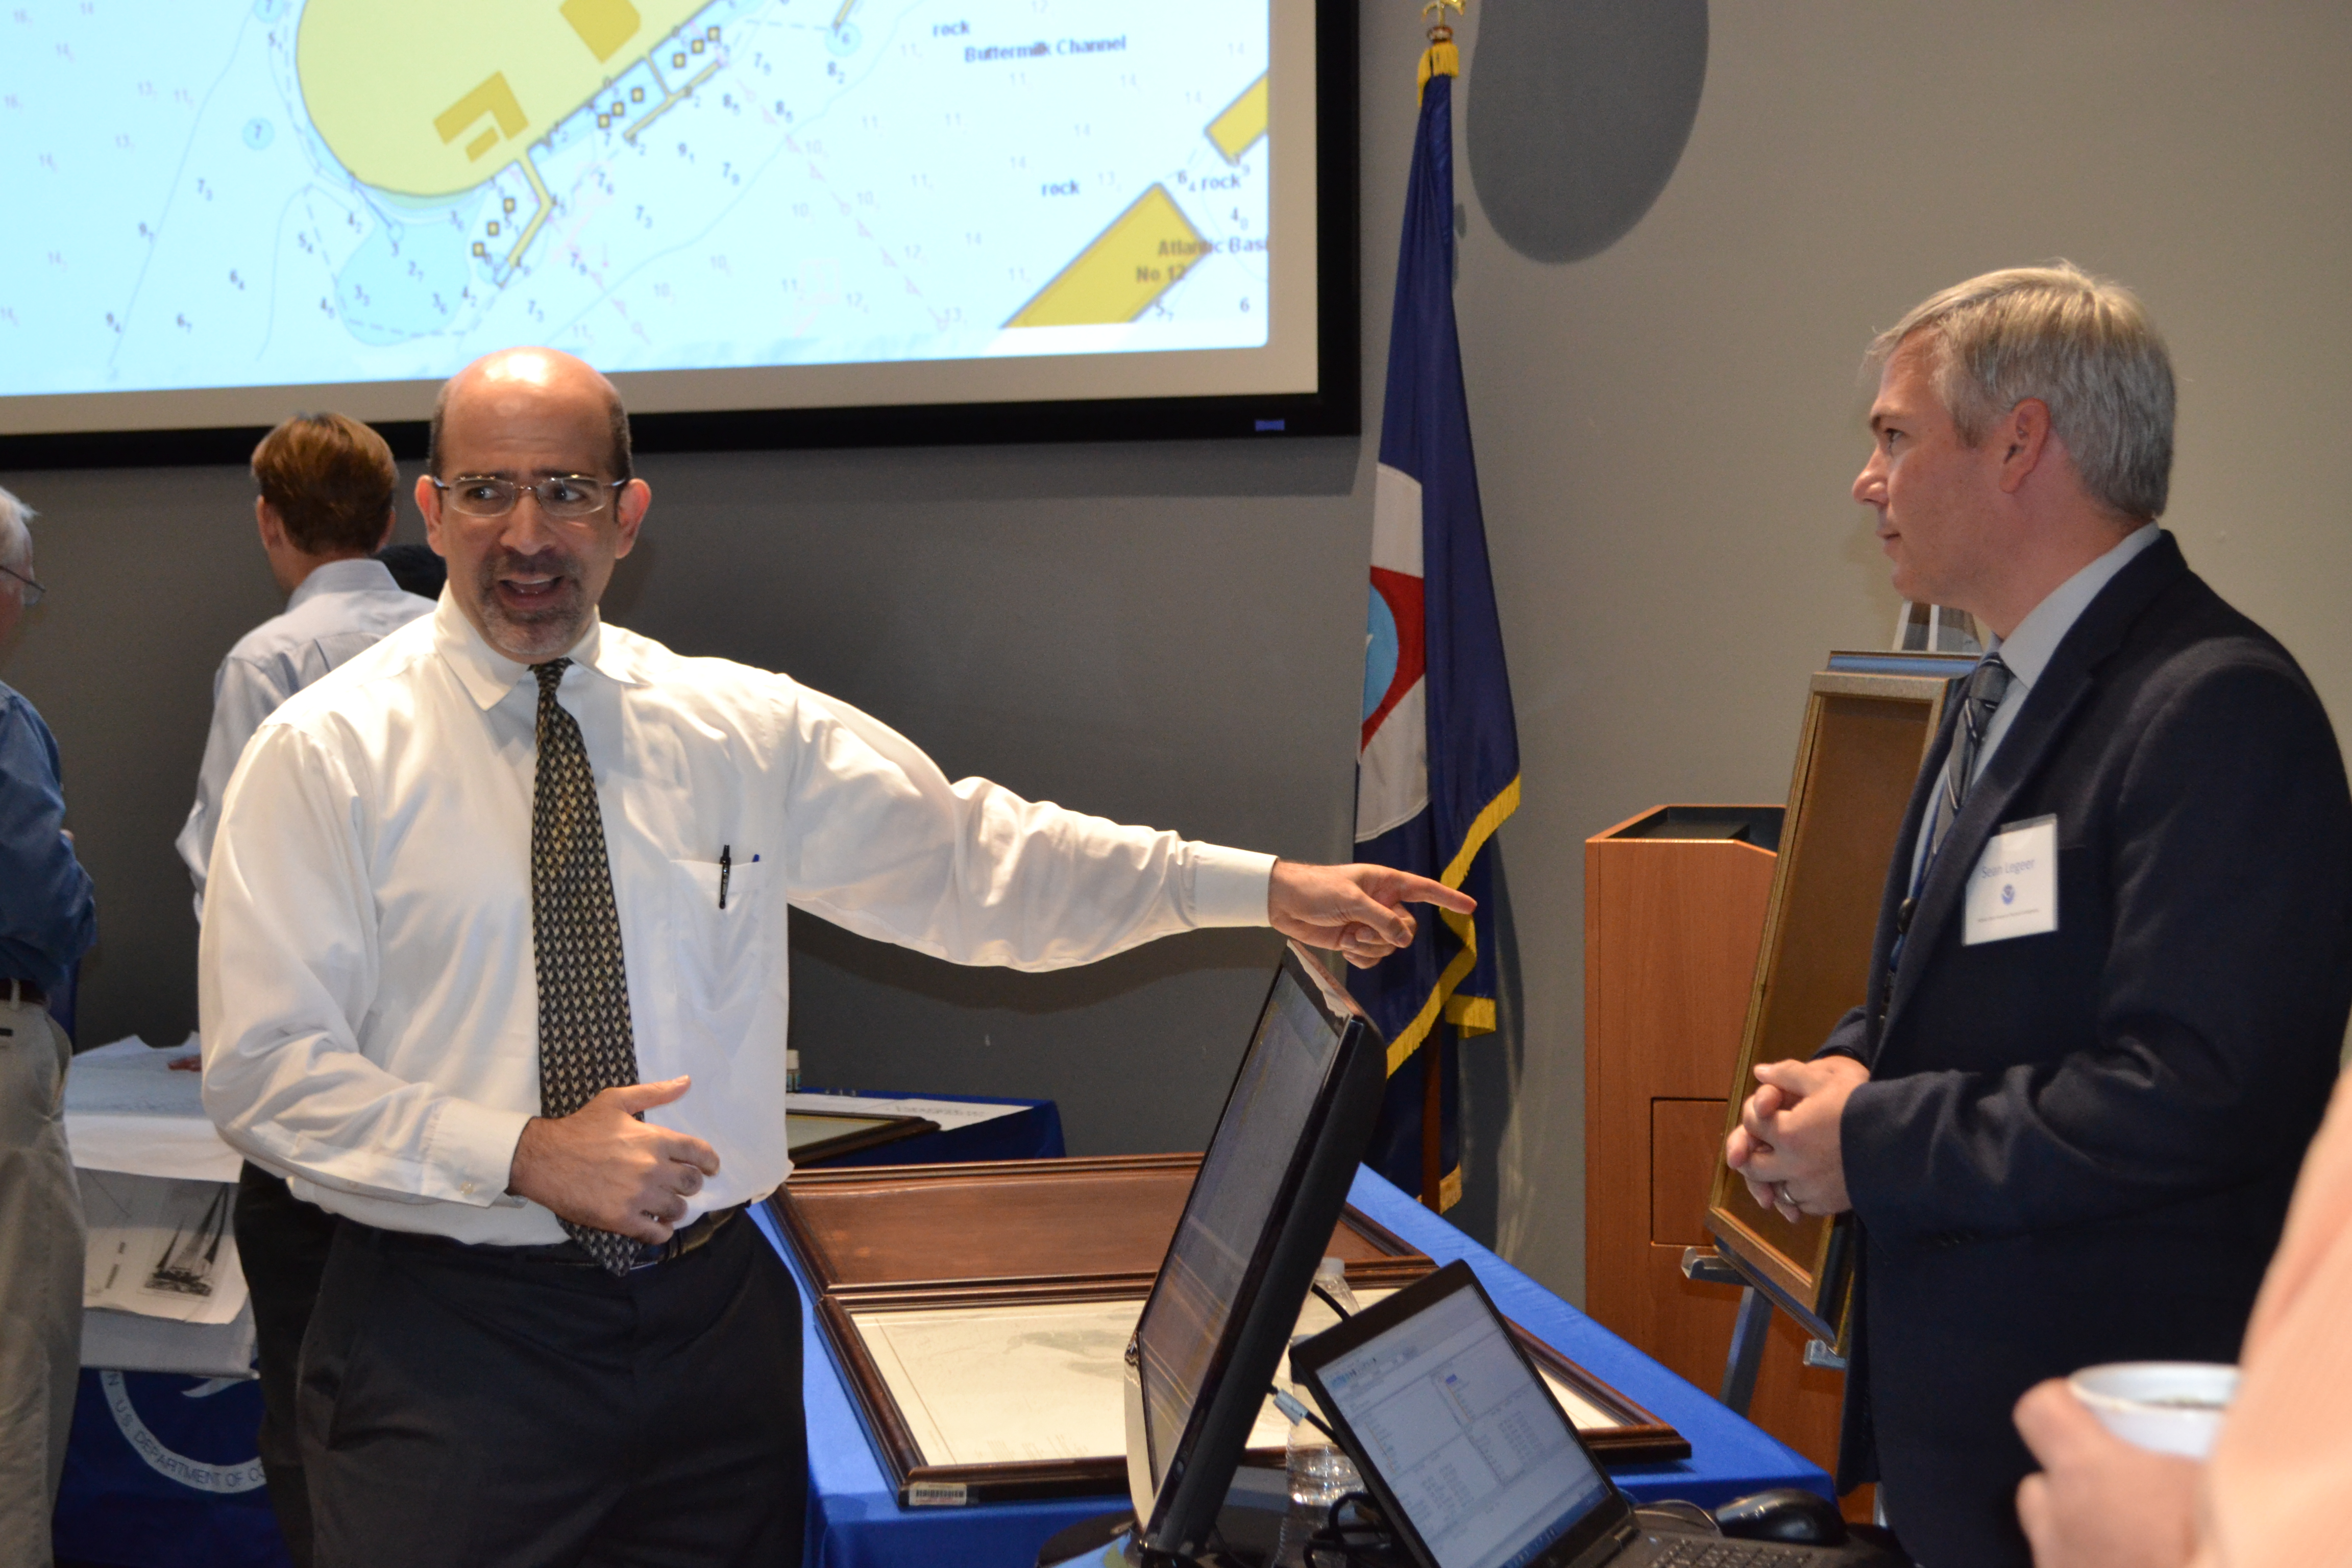 Sean Legeer talks about NOAA nautical charts past, present, and future with Ben Friedman, NOAA Administrator.